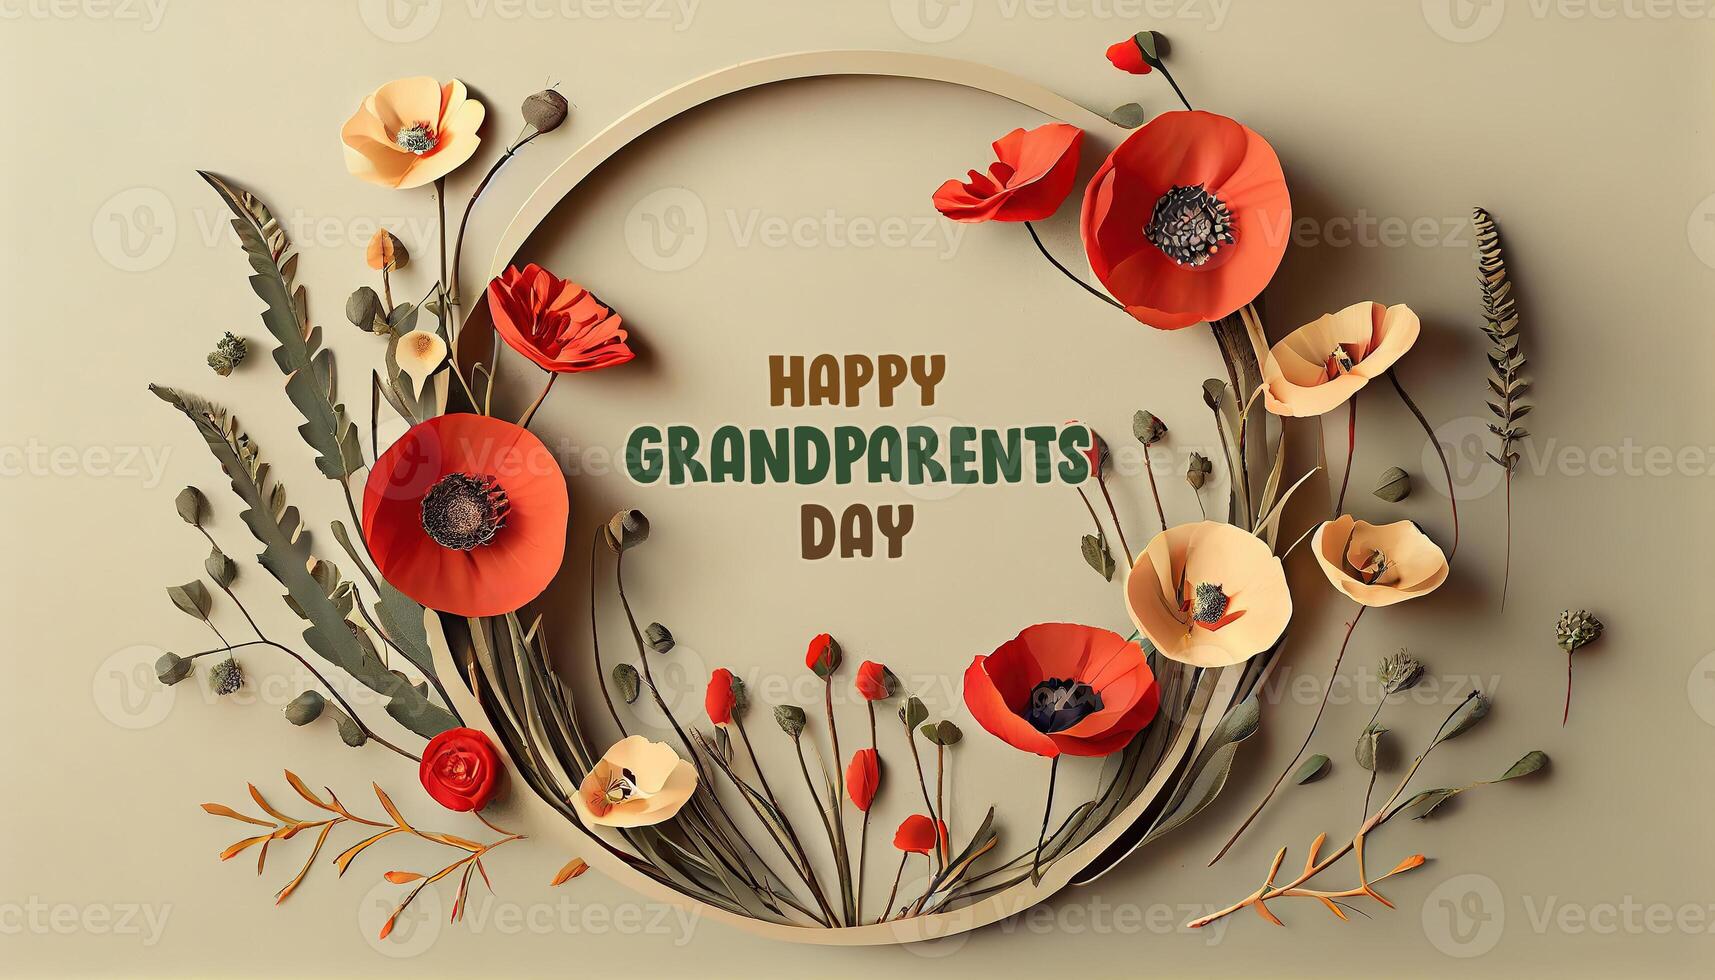 Happy Grandparents Day Round frame wreath with red poppies bloom and branche. photo